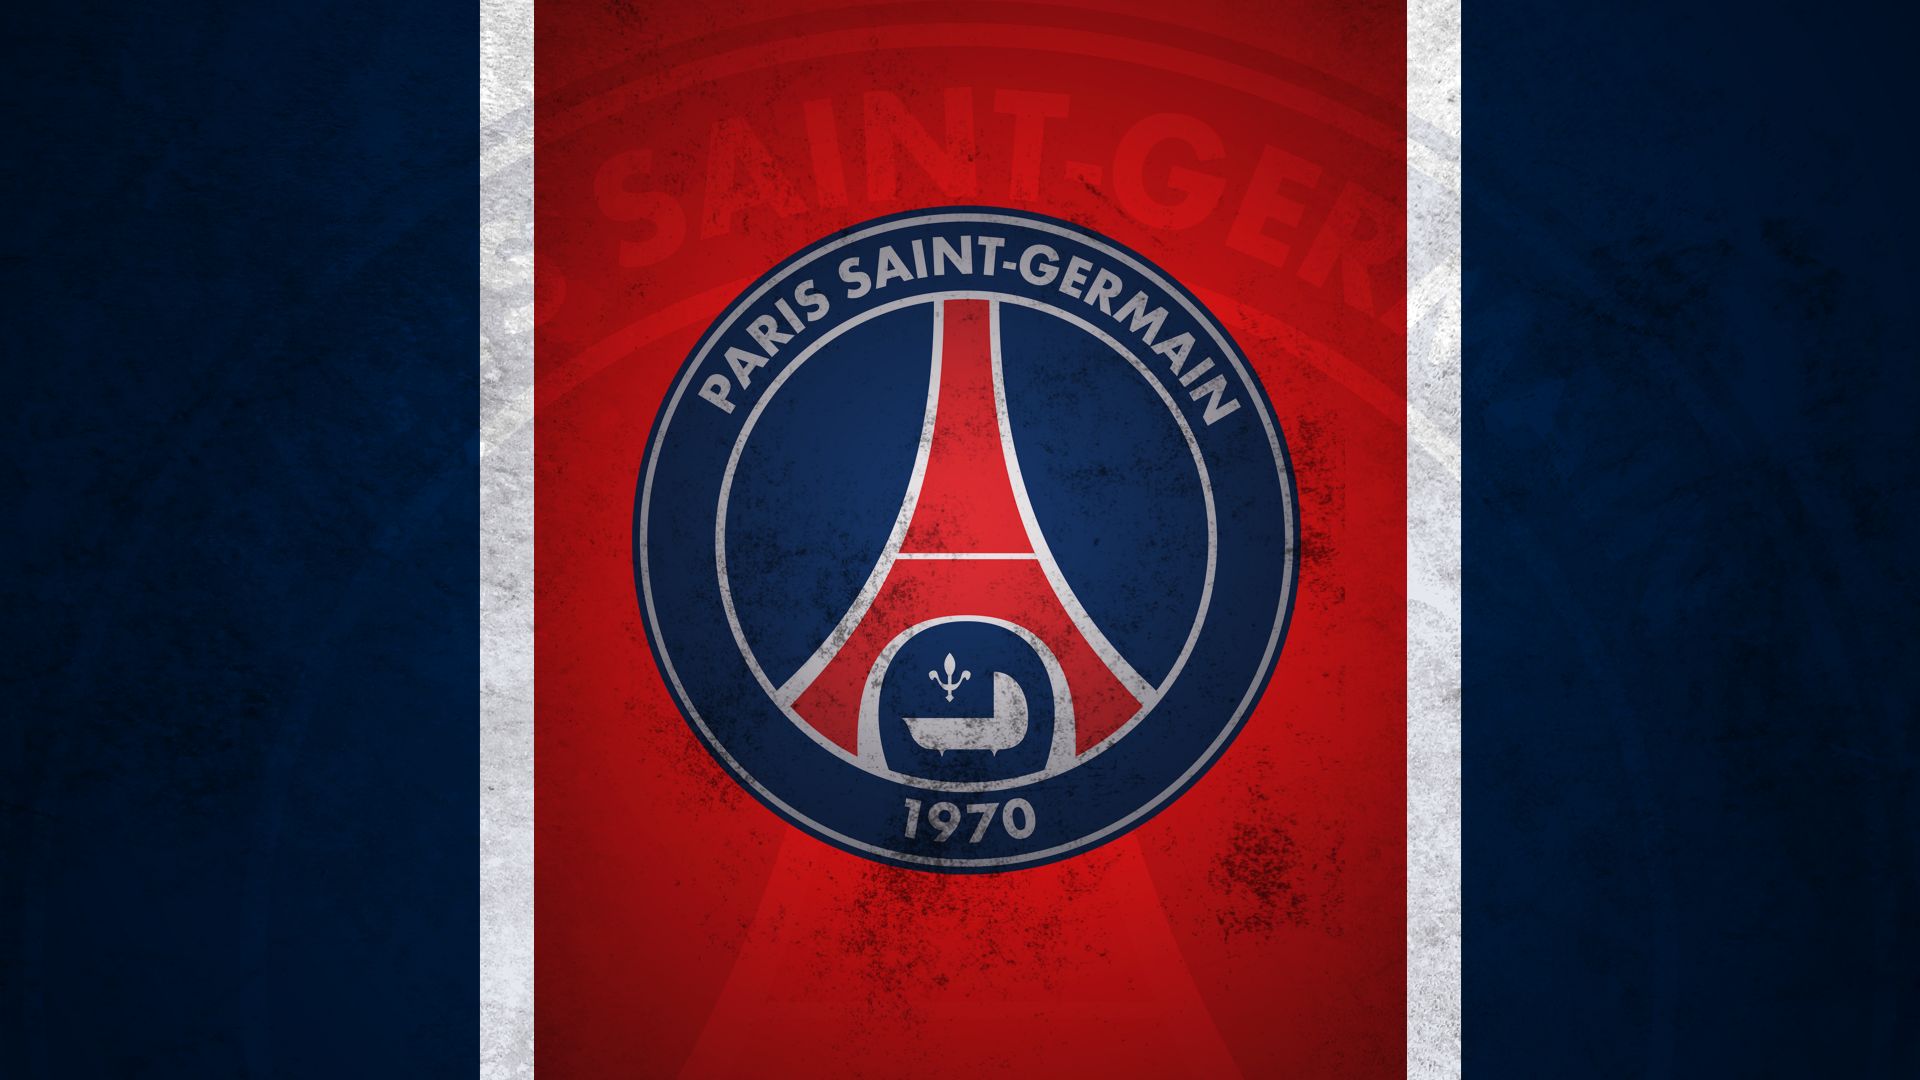 Paris Saint Germain FC Wallpapers and Background Images   stmednet